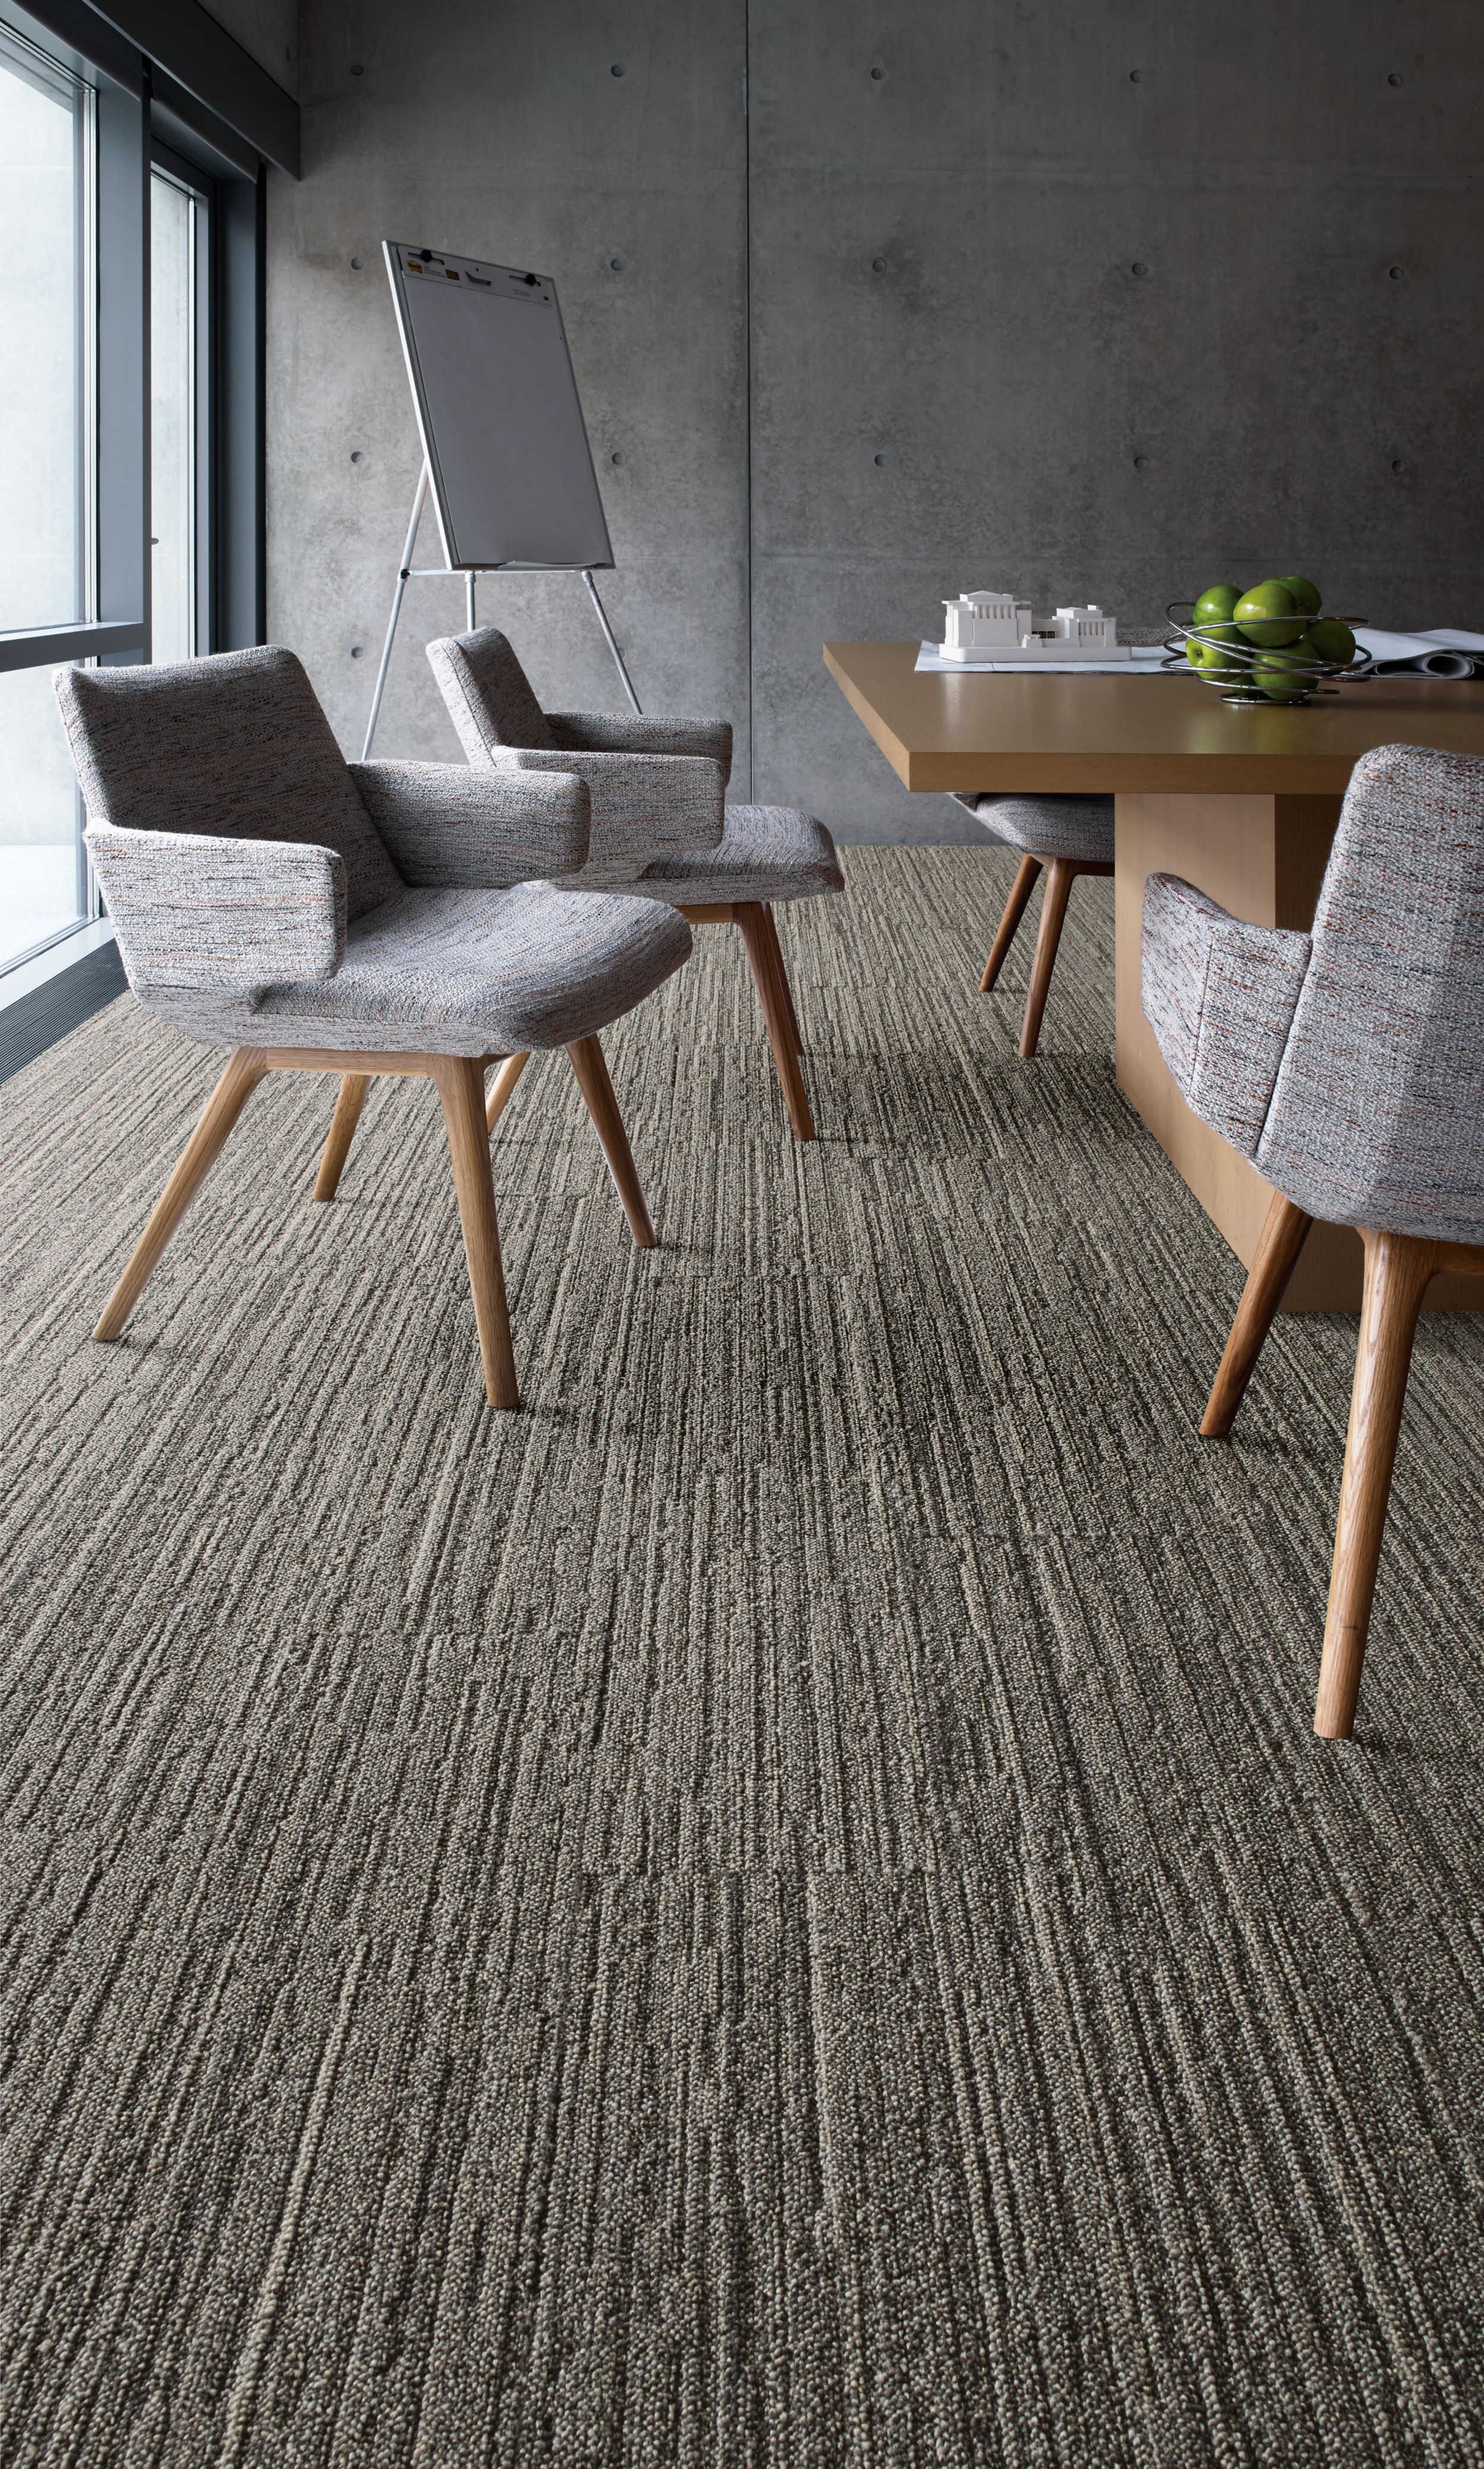 Interface WW880 plank carpet tile in meeting room with table and chairs numéro d’image 1